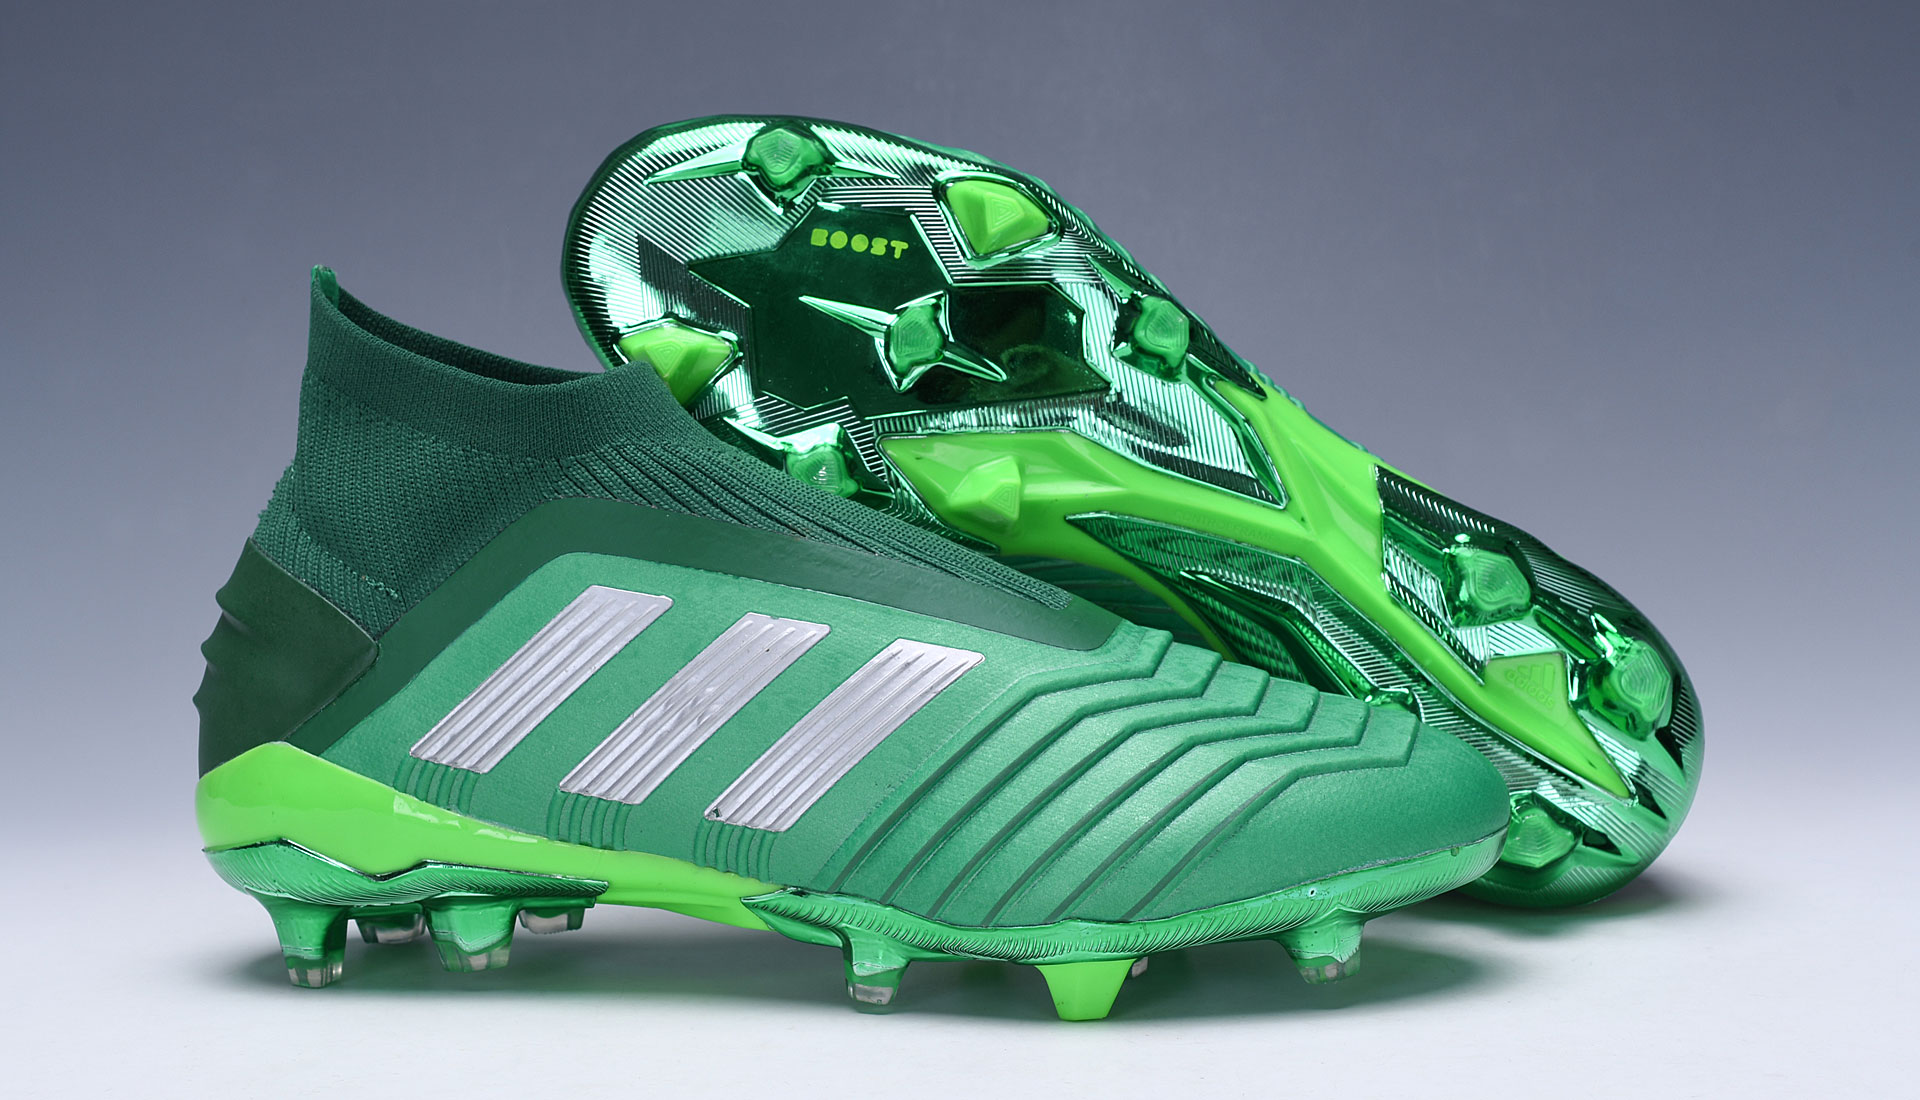 Adidas Predator 19+ FG Soccer Cleats - Green/Silver | Superior Control and Performance